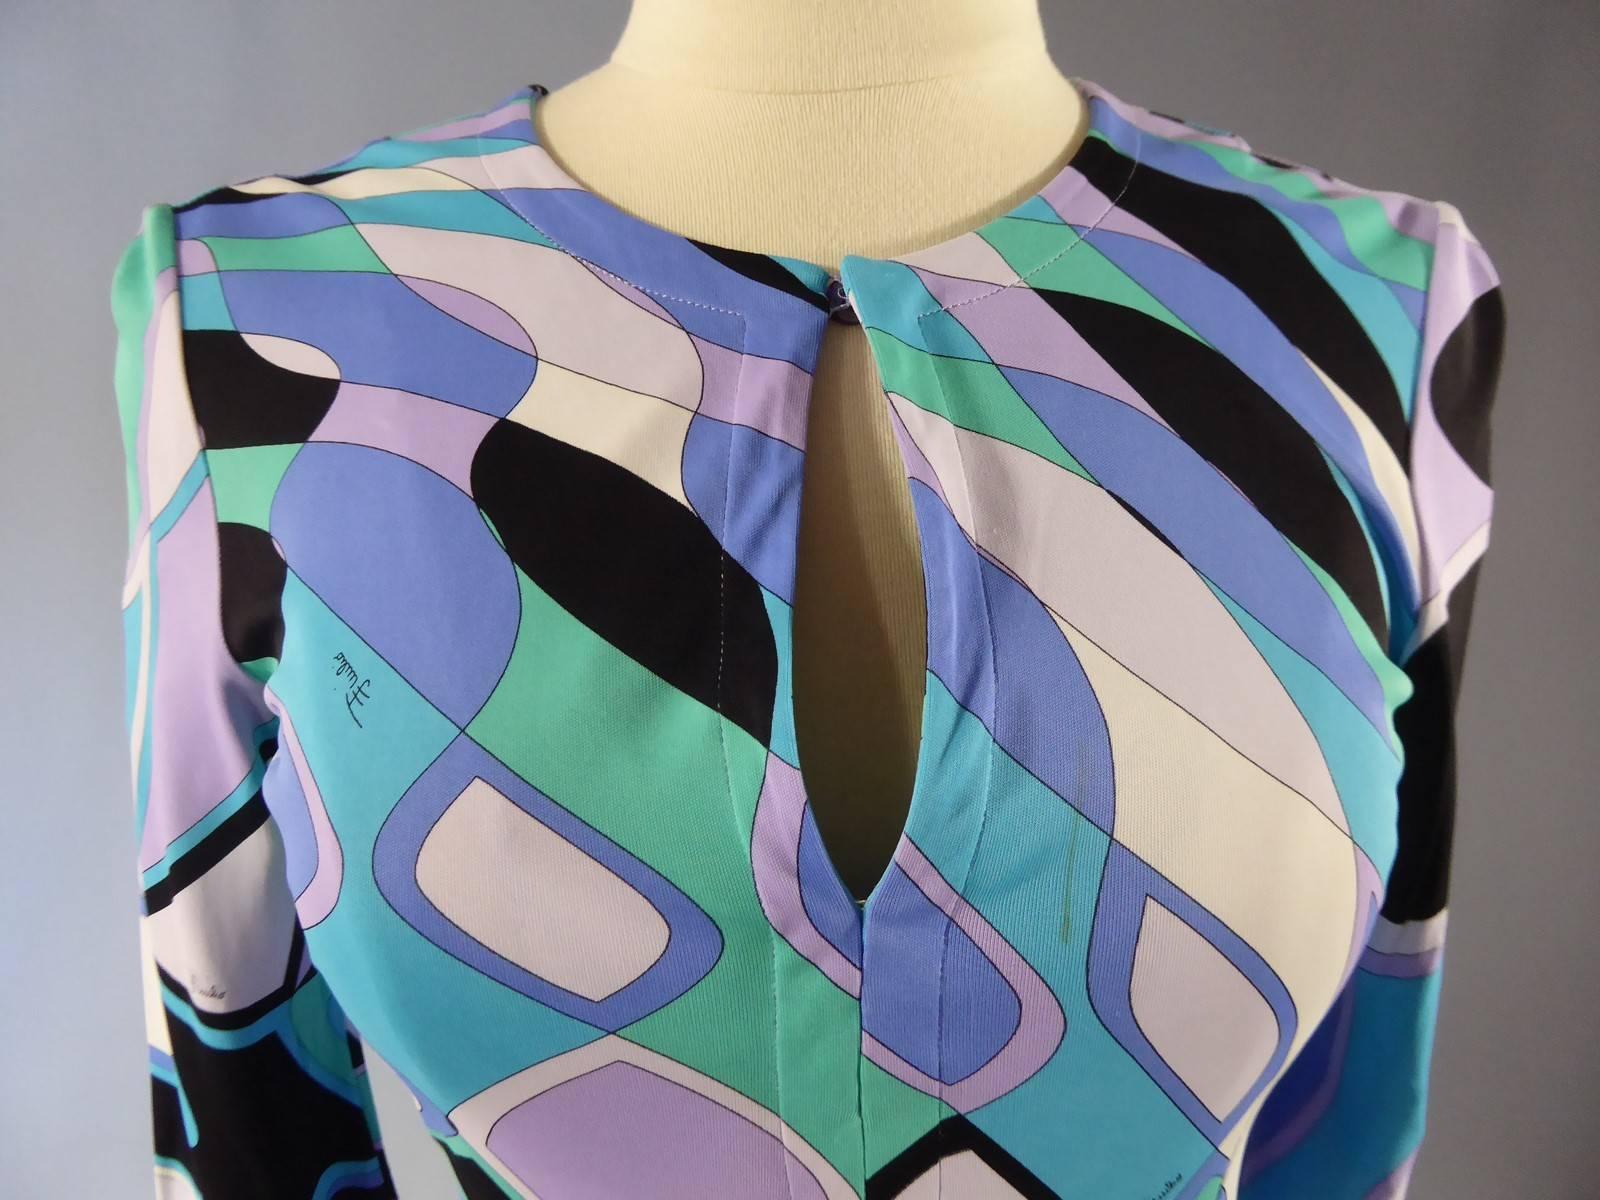 Circa 1980
Italy
Emilio Pucci dress with graphic patterns in lilac, light green, turquoise blue, pale pink, black and cream. Pattern and cut of the dress are emblematic of the psychedelic art and style of the 1970s. Perfectly fits the